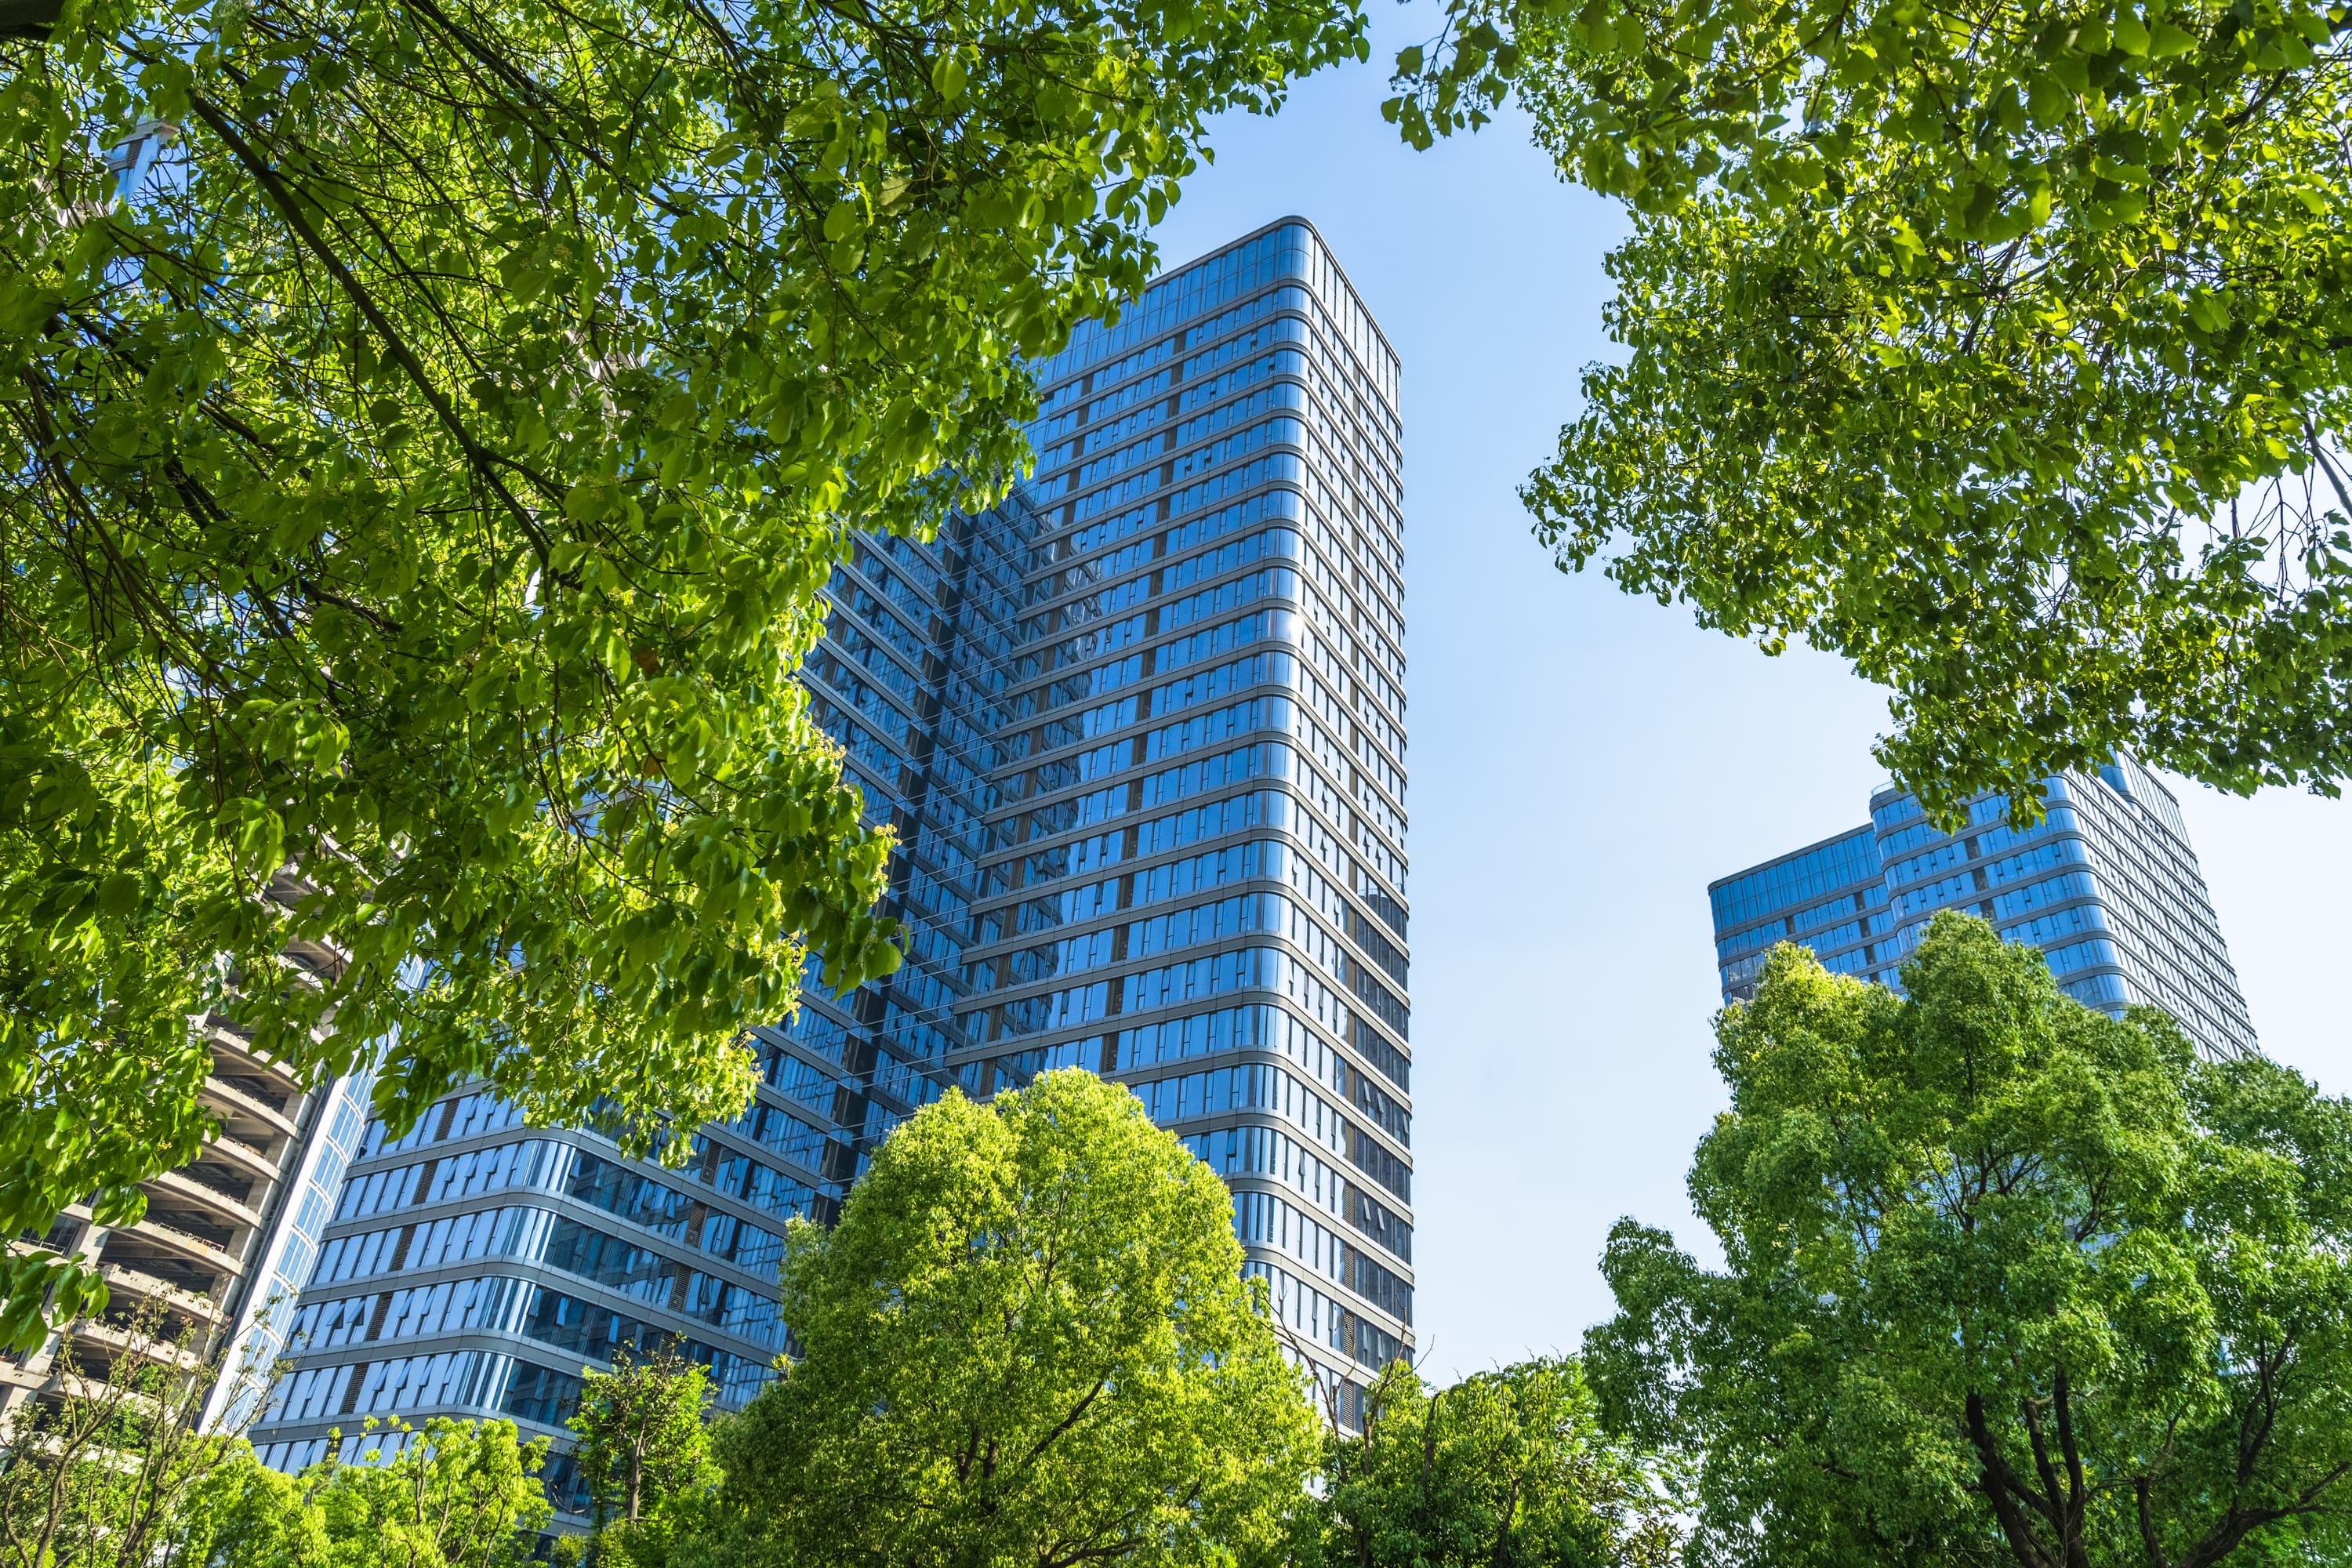 Tall buildings surrounded by trees